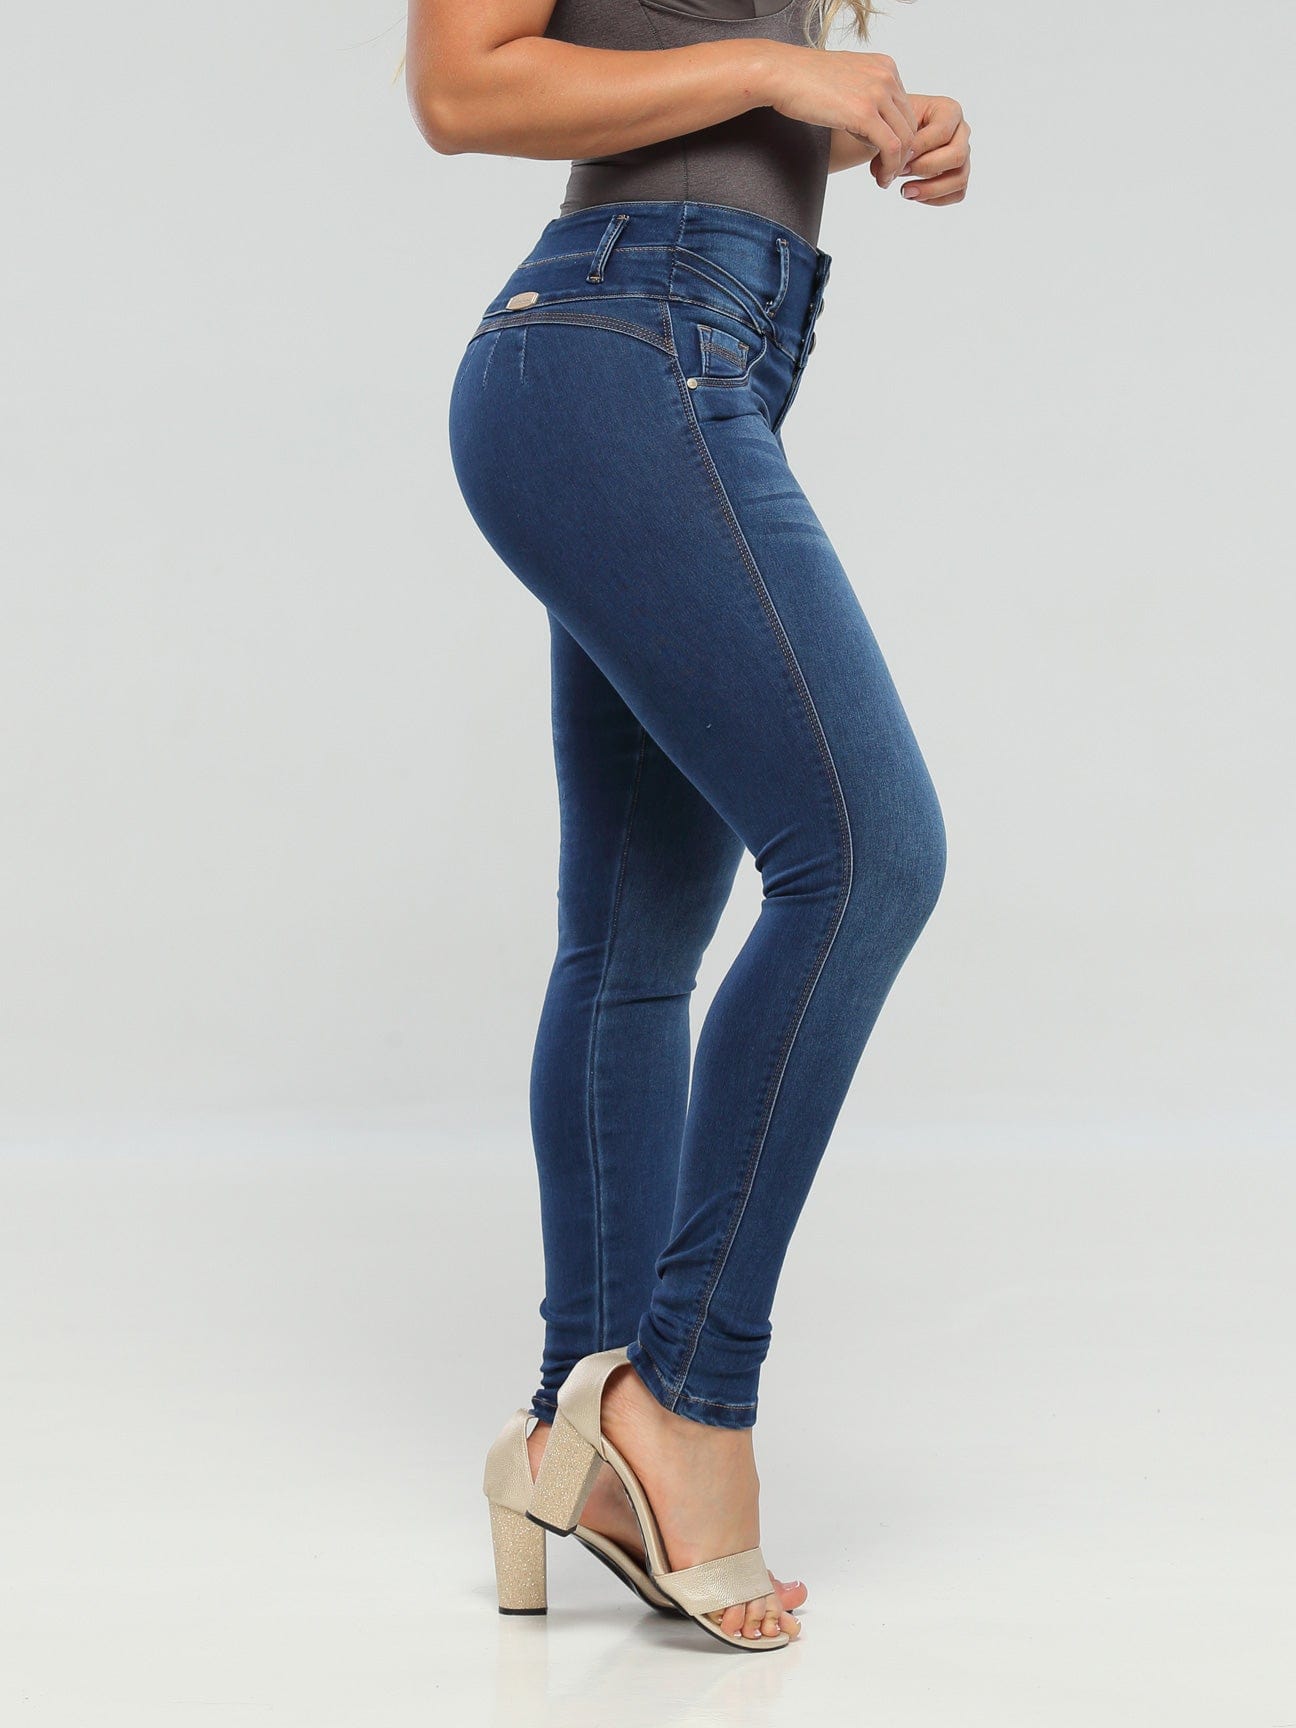 Butt Lifting Colombian Jeans for Women Butt Lift Pantalones Colombianos  Levanta Cola High Waist Skinny Blue at  Women's Jeans store